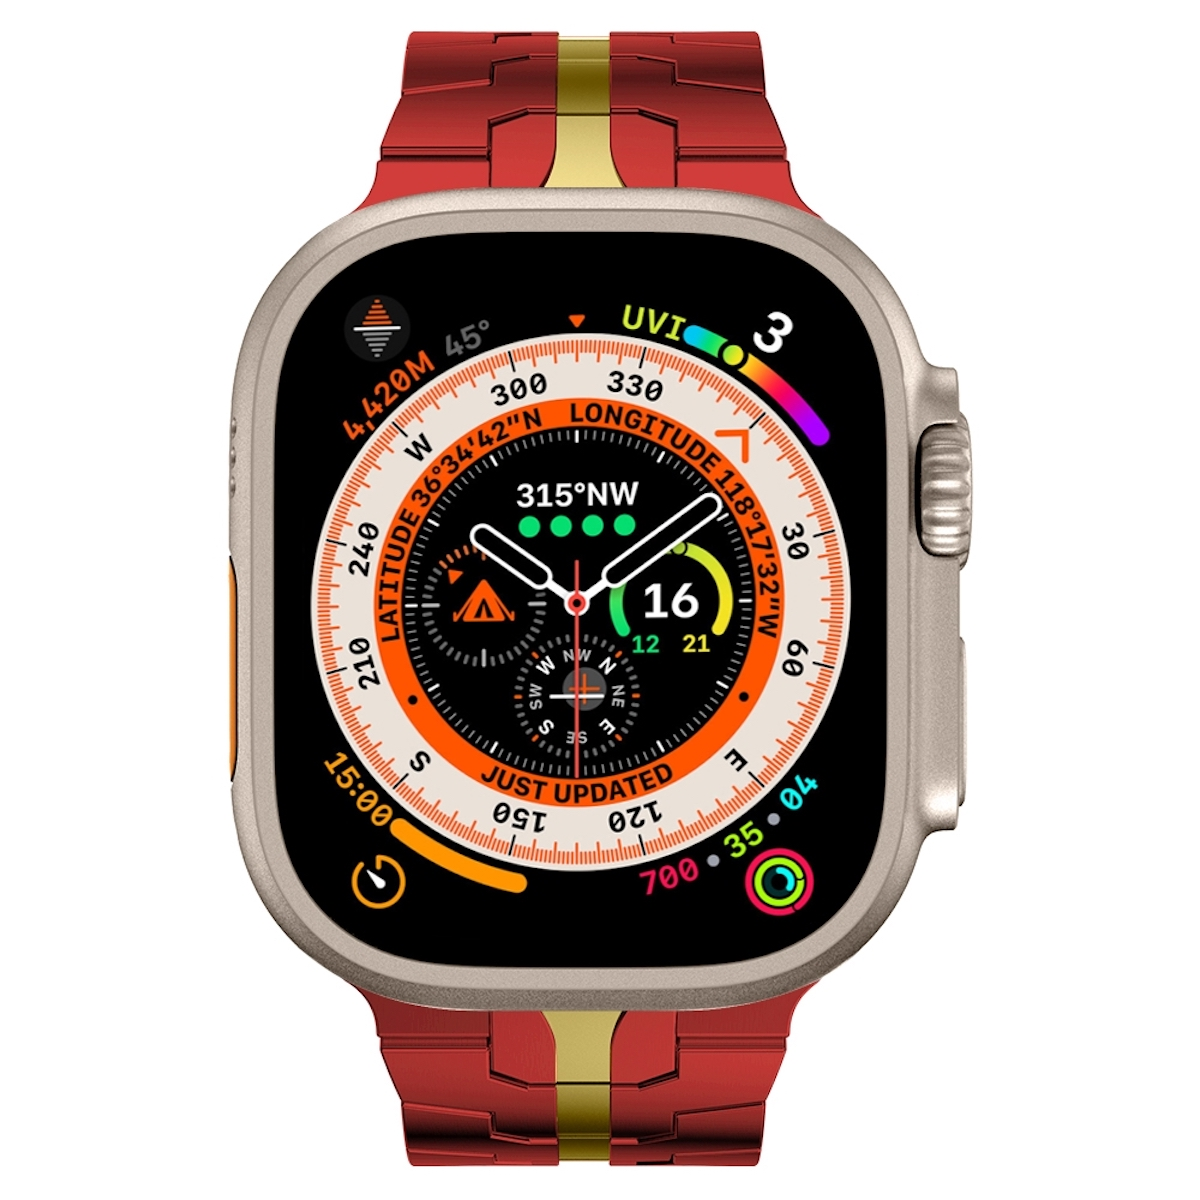 WIGENTO Deluxe 3 4 7 5 2 Apple, 2 Series Ersatzarmband, Gold 42mm, SE / / 6 Rot 9 45 Stahl 1 / 1 8 Ultra Band, Watch 49mm 44 